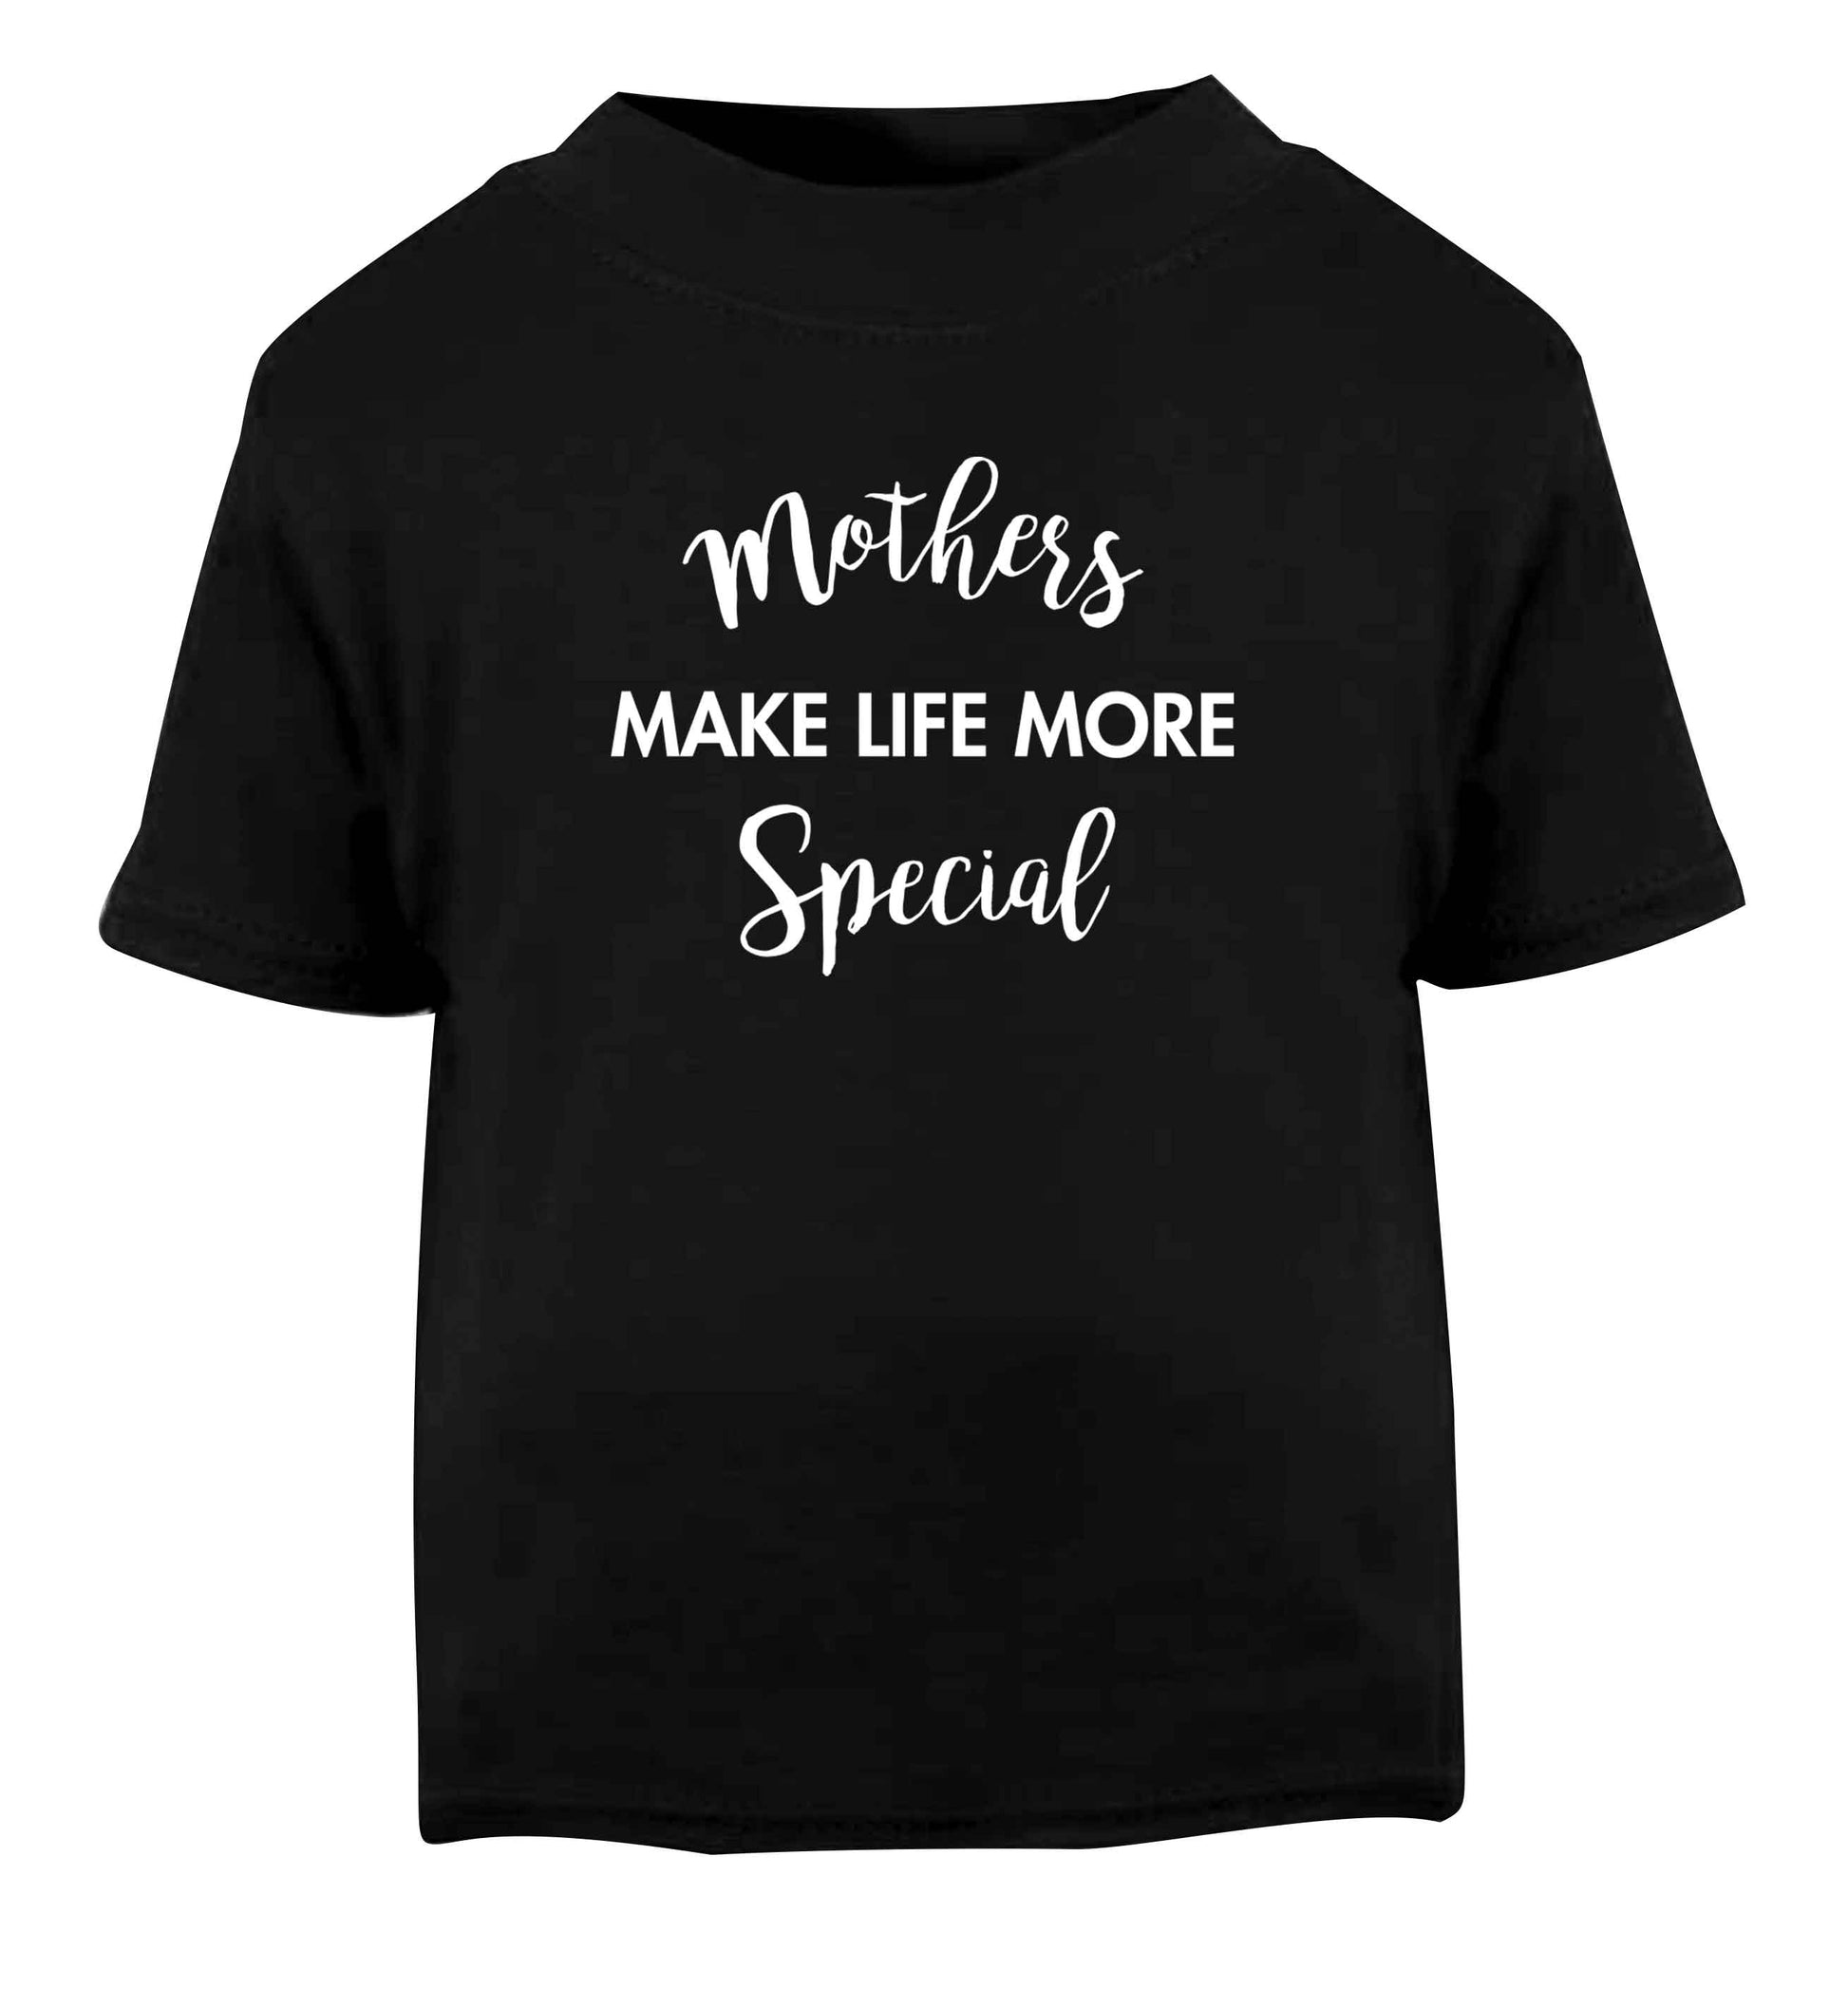 Mother's make life more special Black baby toddler Tshirt 2 years